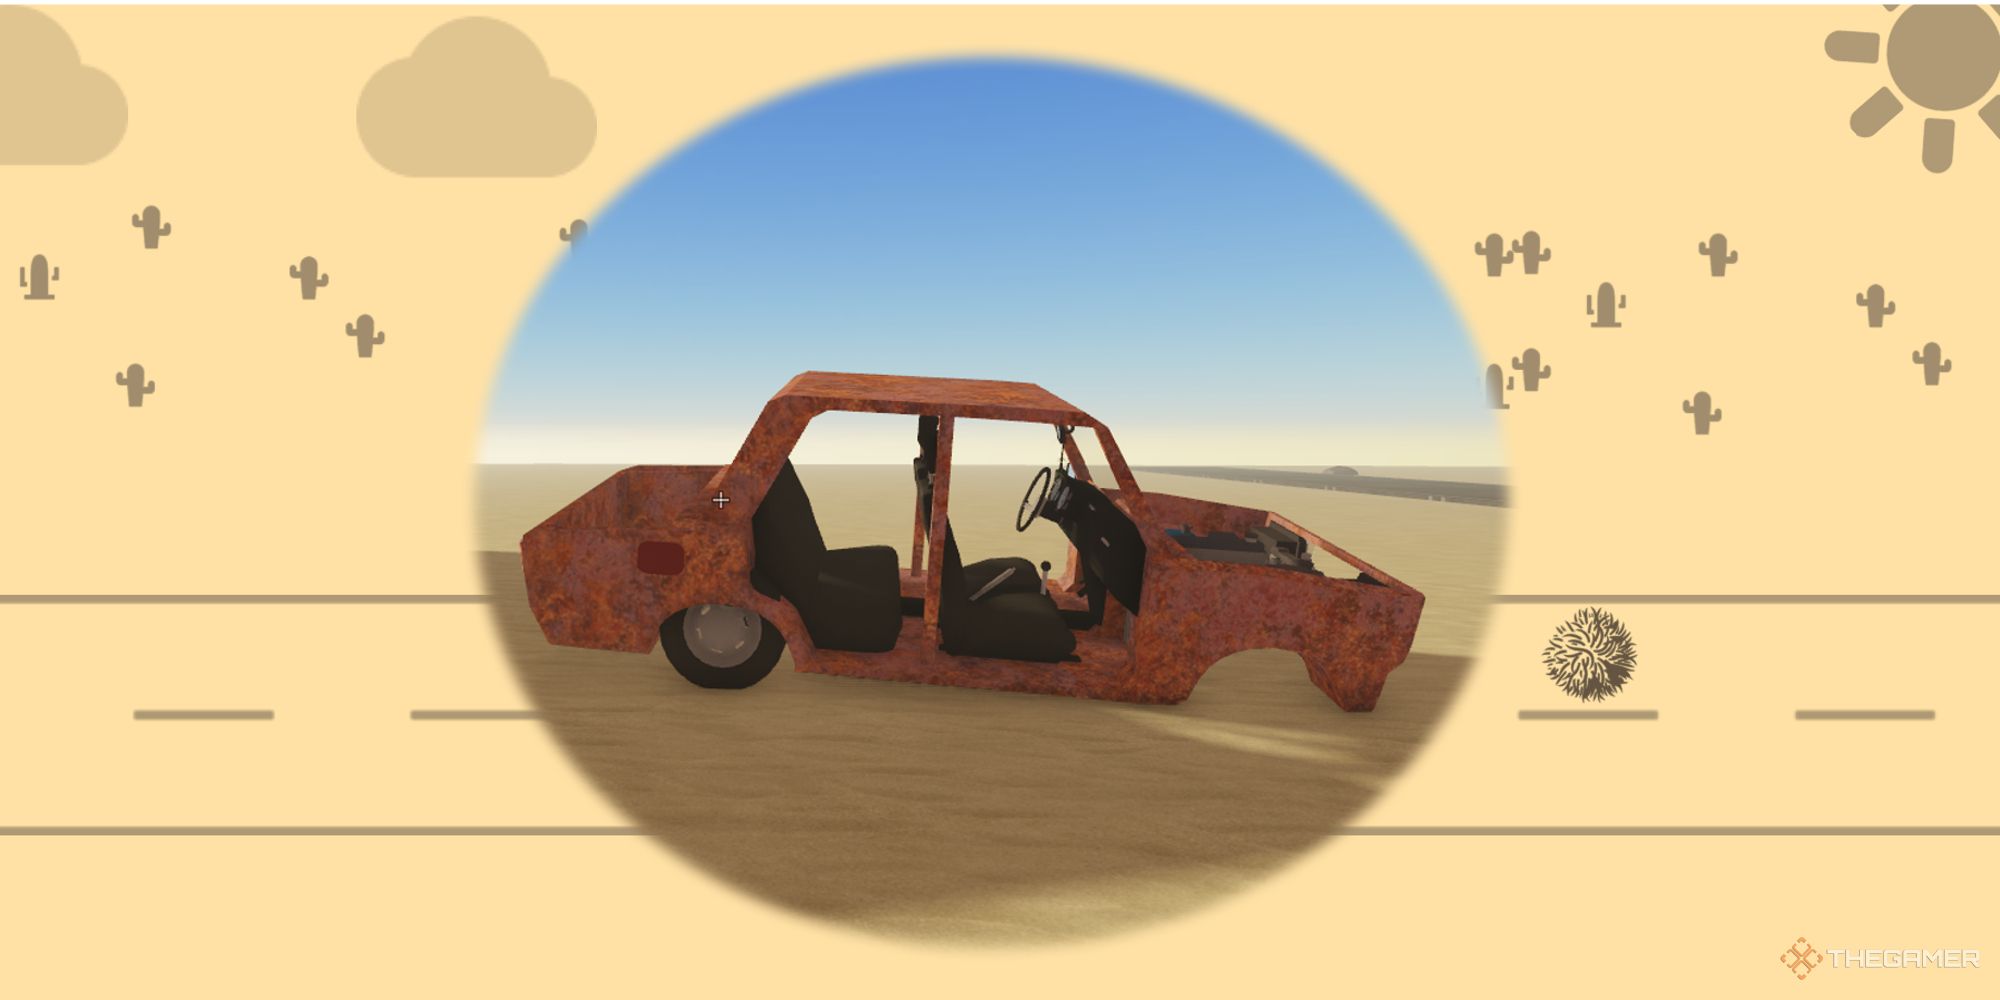 The Dusty Trip loading screen with the starting car in front in Roblox.